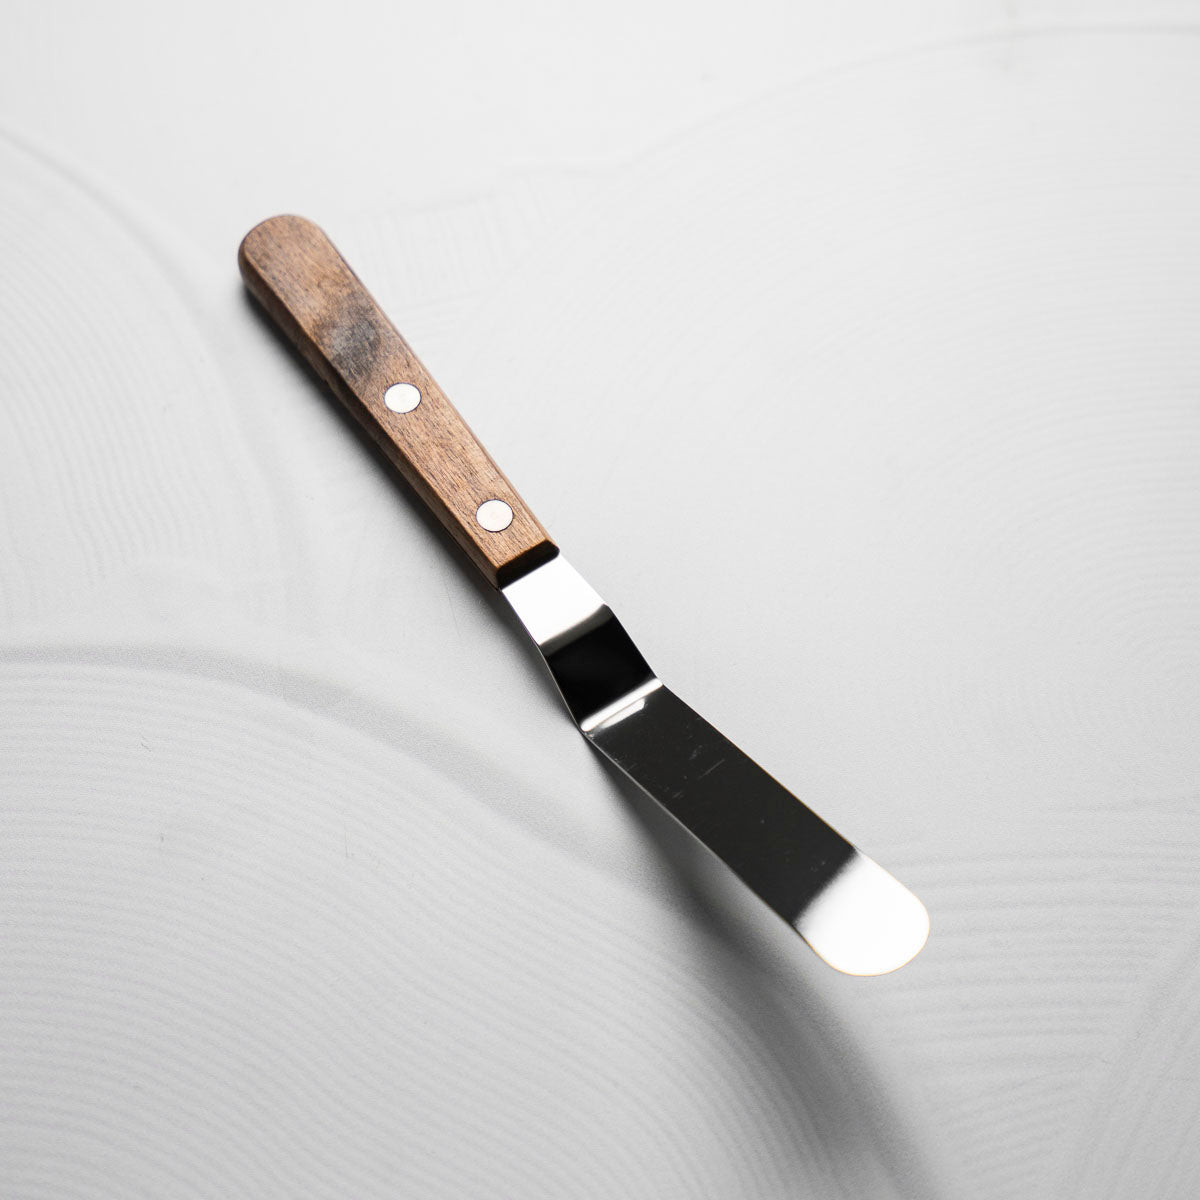 Stainless Steel Spatula - Wooden Handle